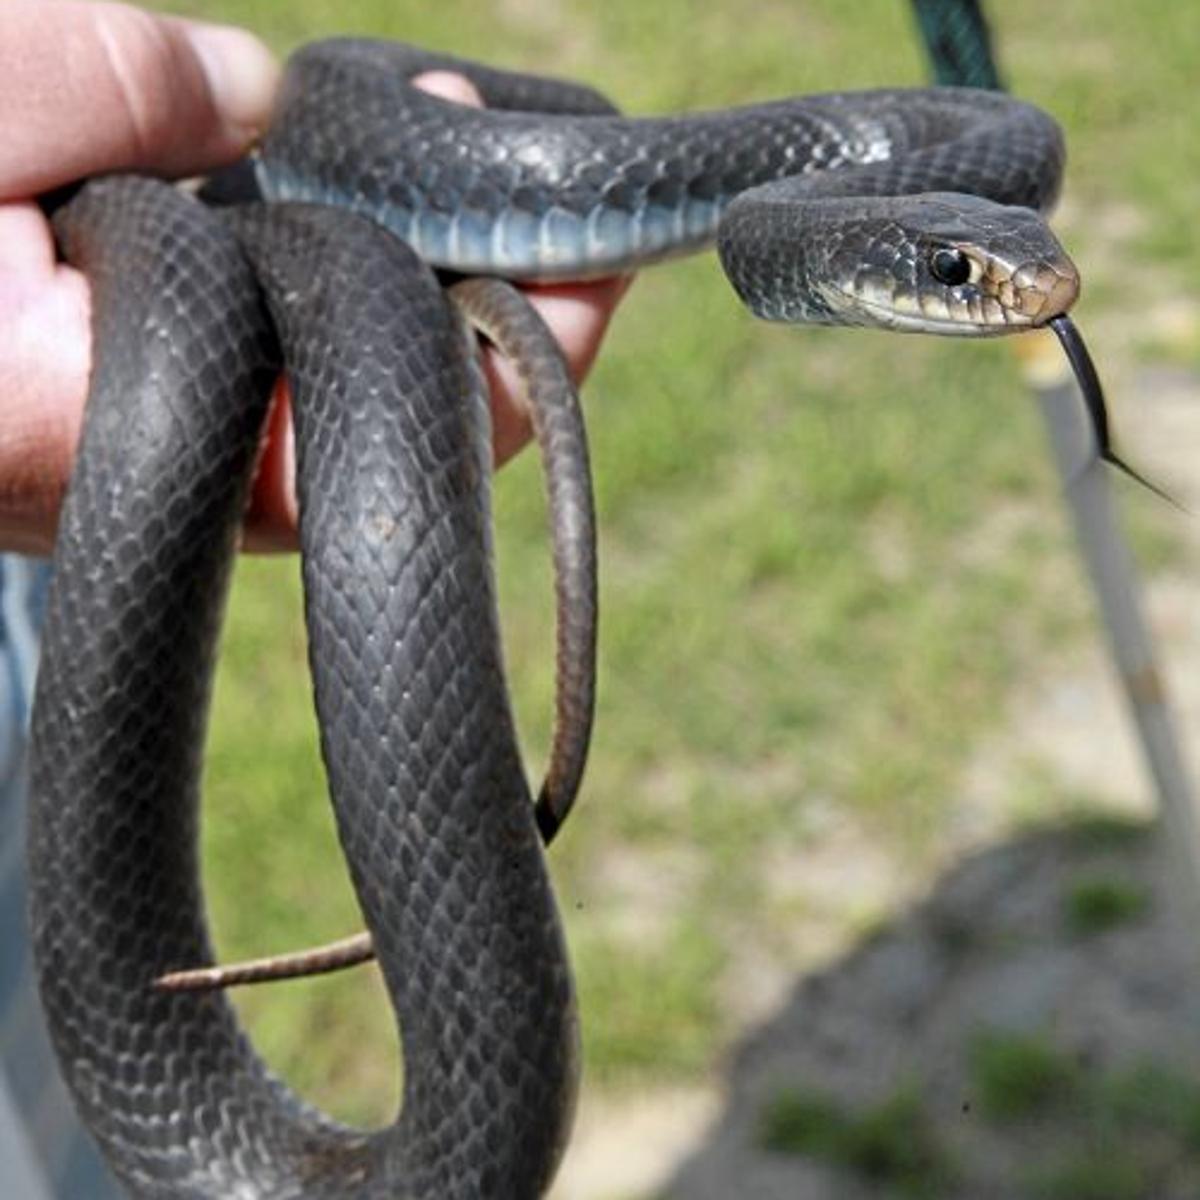 World Around You Black Racer Snakes Generally Lightning Fast And Territorial Sports News Tulsaworld Com